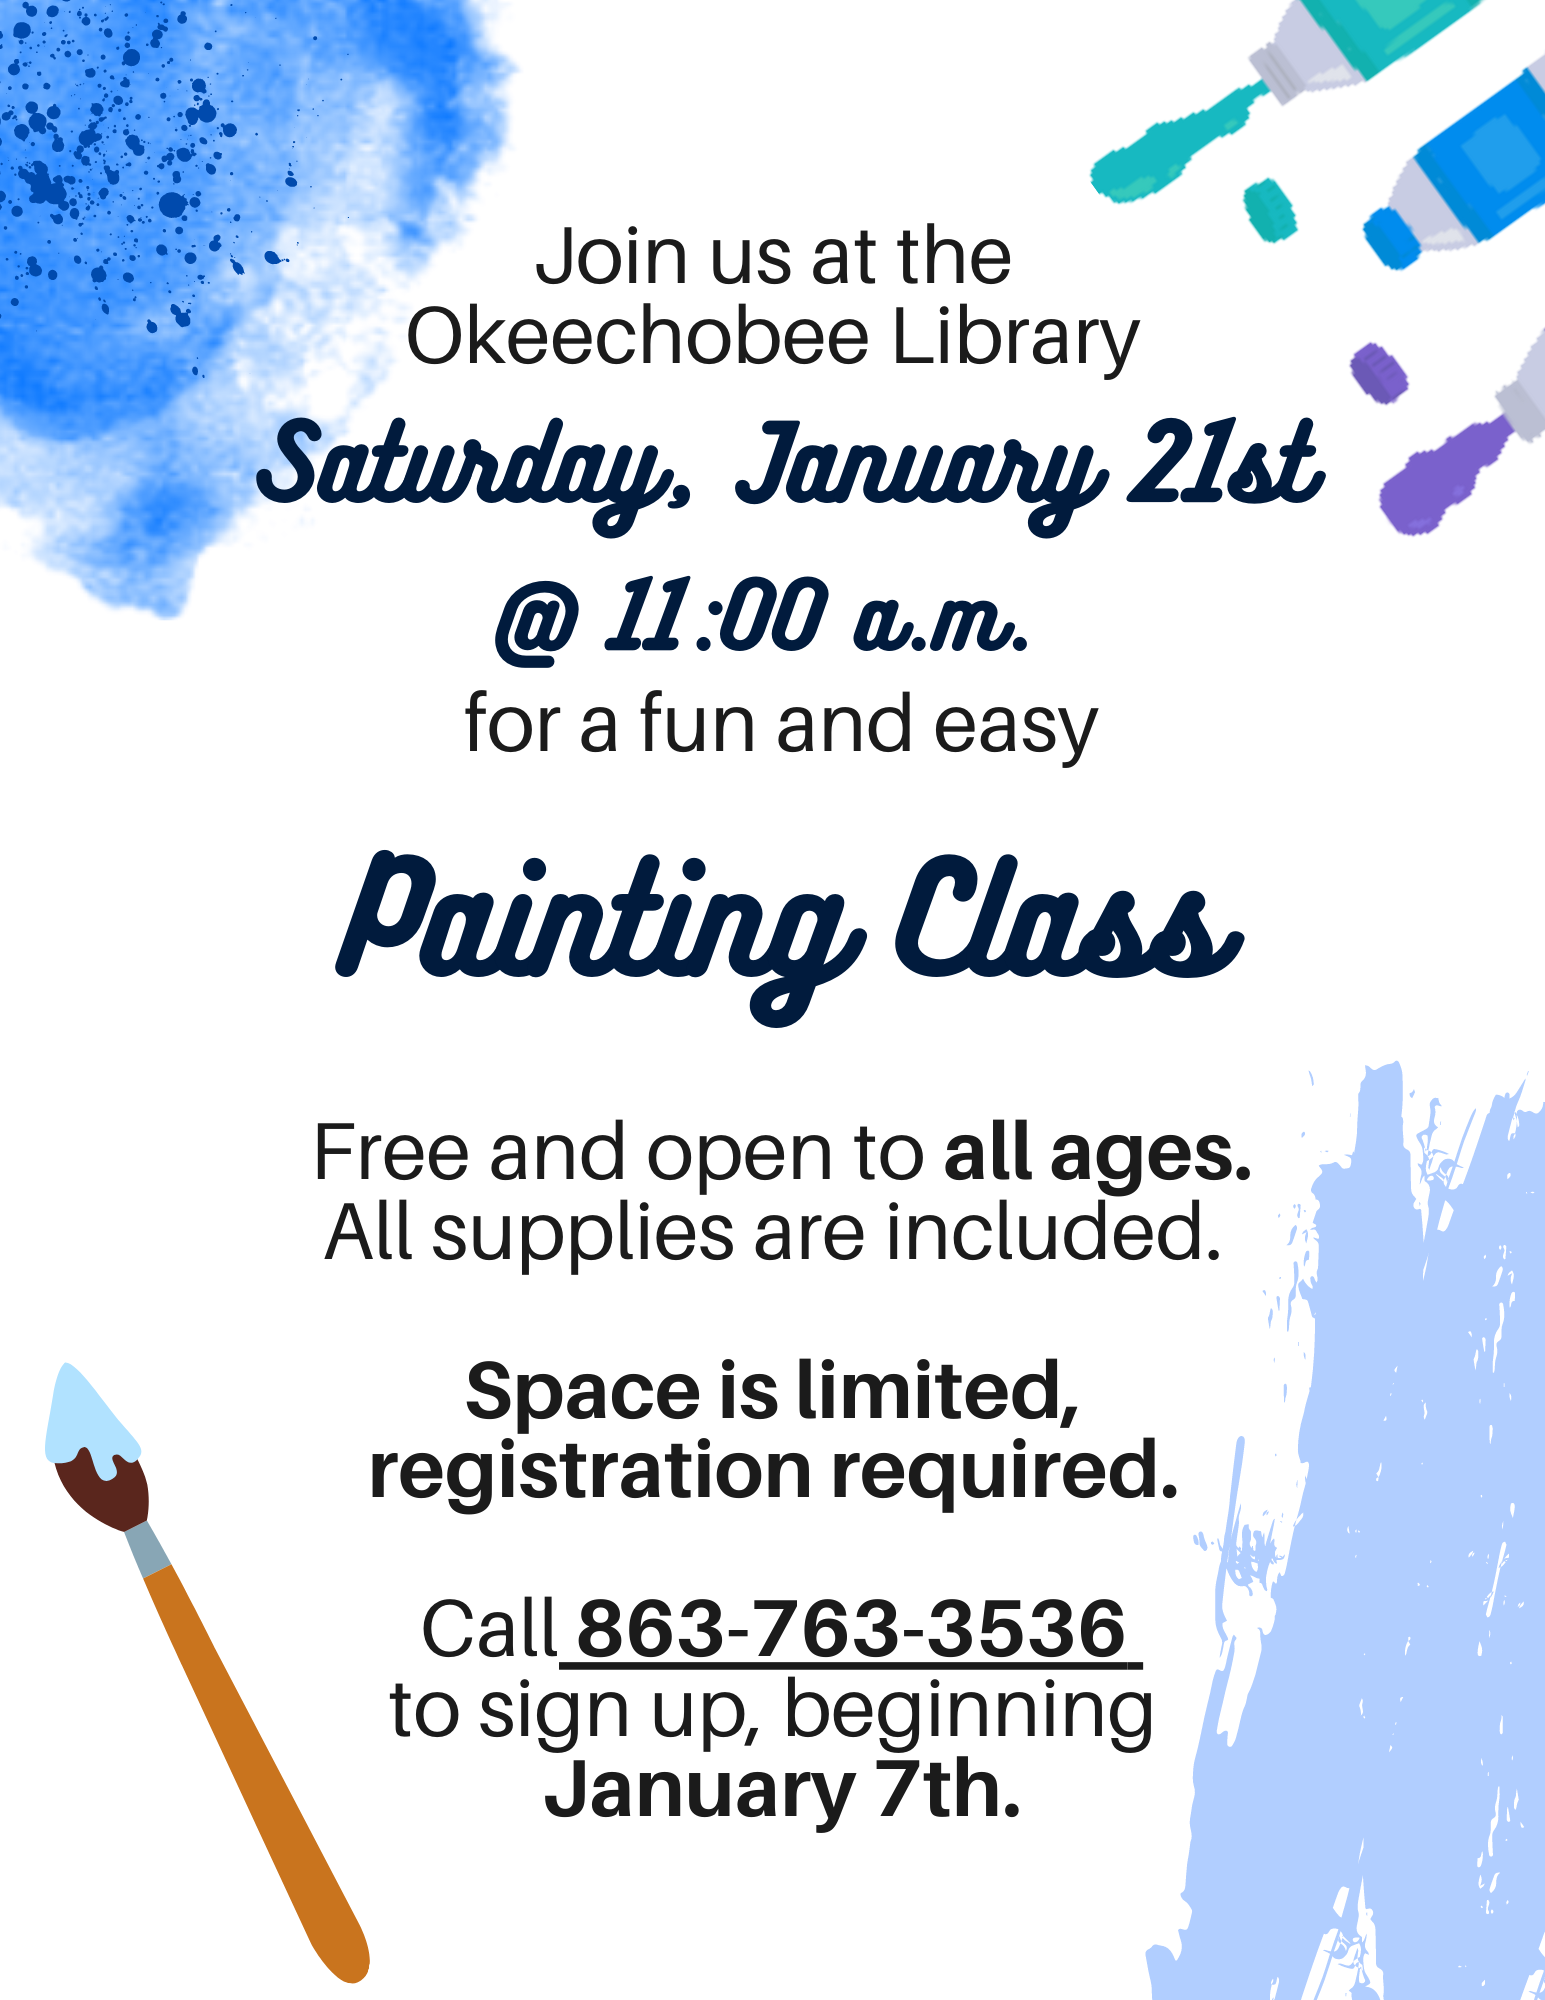 "Join us Saturday, January 21st at 11am for FREE! This event is open to all ages and all supplies are included."